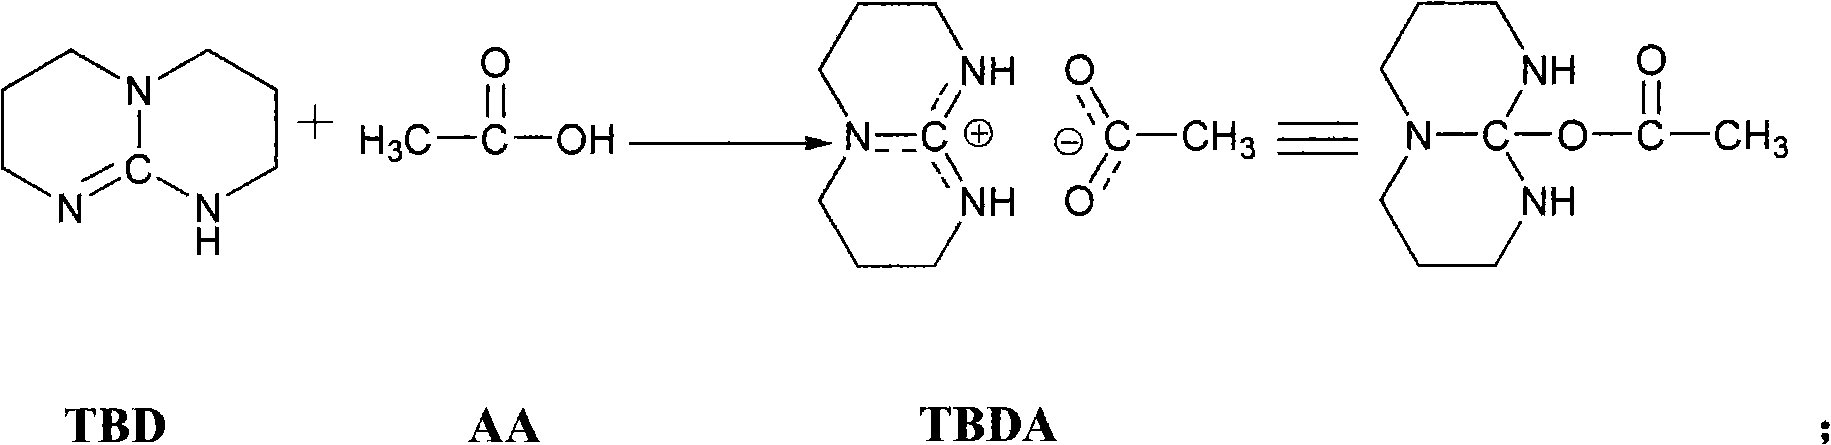 Process for synthesizing acetate bicyclo guanidine and catalysis synthesis for poly-lactide and poly-serine morpholine diketone